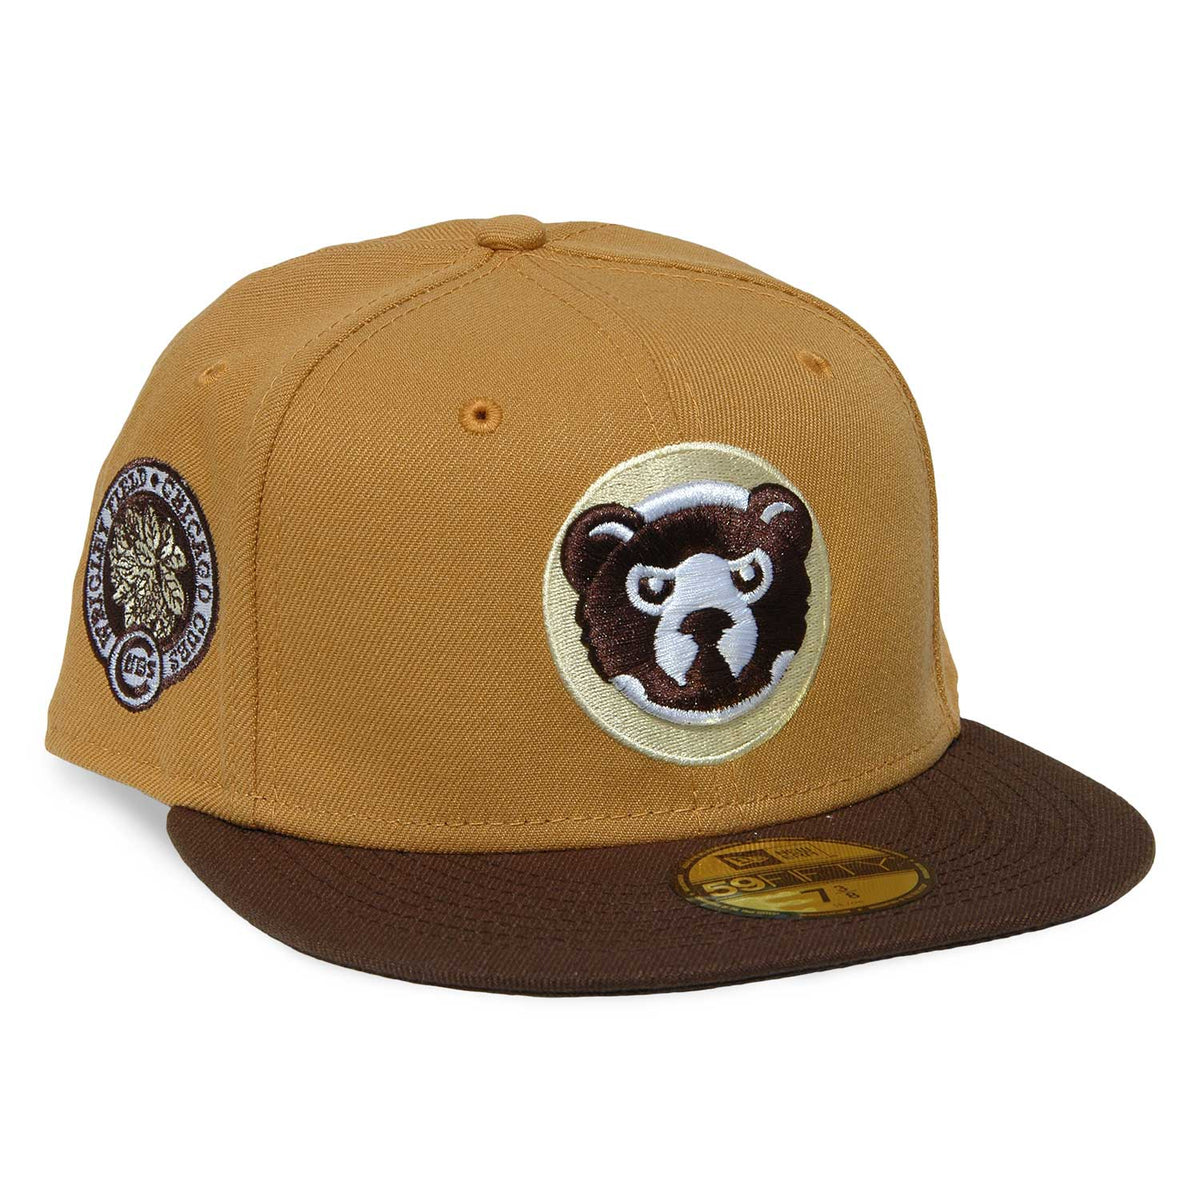 Chicago Cubs Tan & Brown Angry Bear Wrigley Field 59FIFTY Fitted Cap 7 1/4 = 22 3/4 in = 57.8 cm